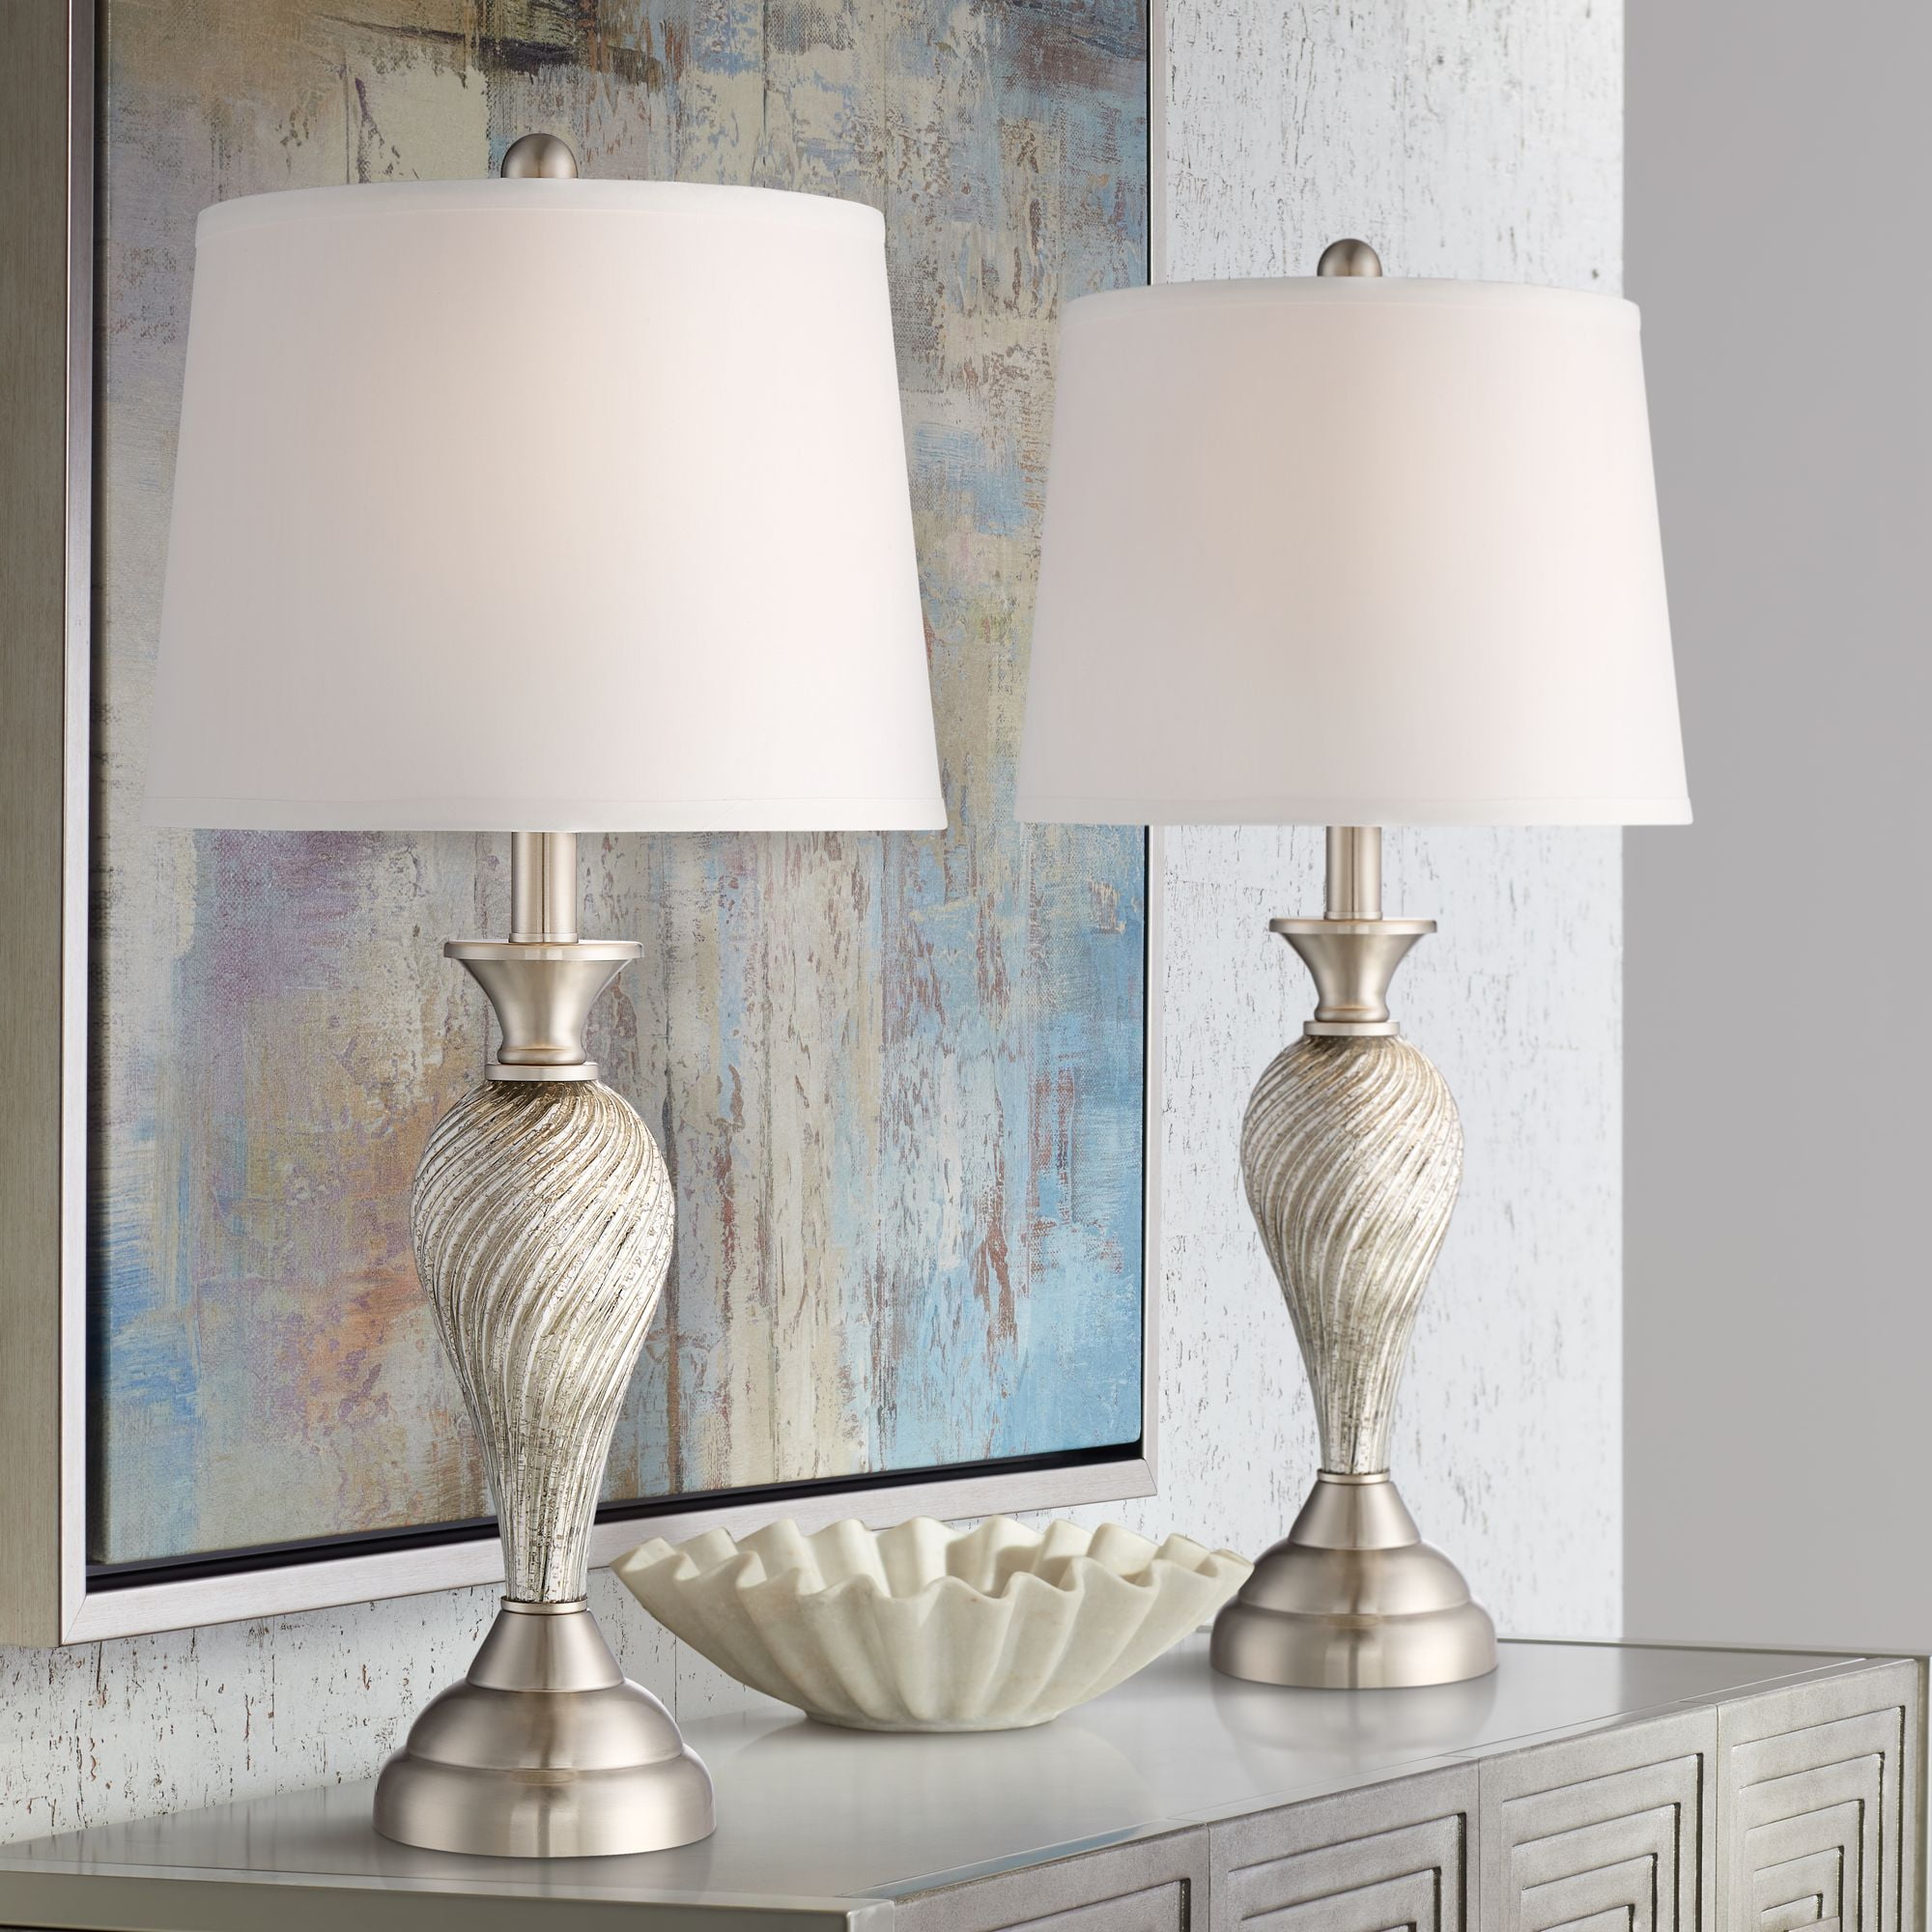 Regency Hill Table Lamps Set Of 2 With, Set Of Two Glass Table Lamps